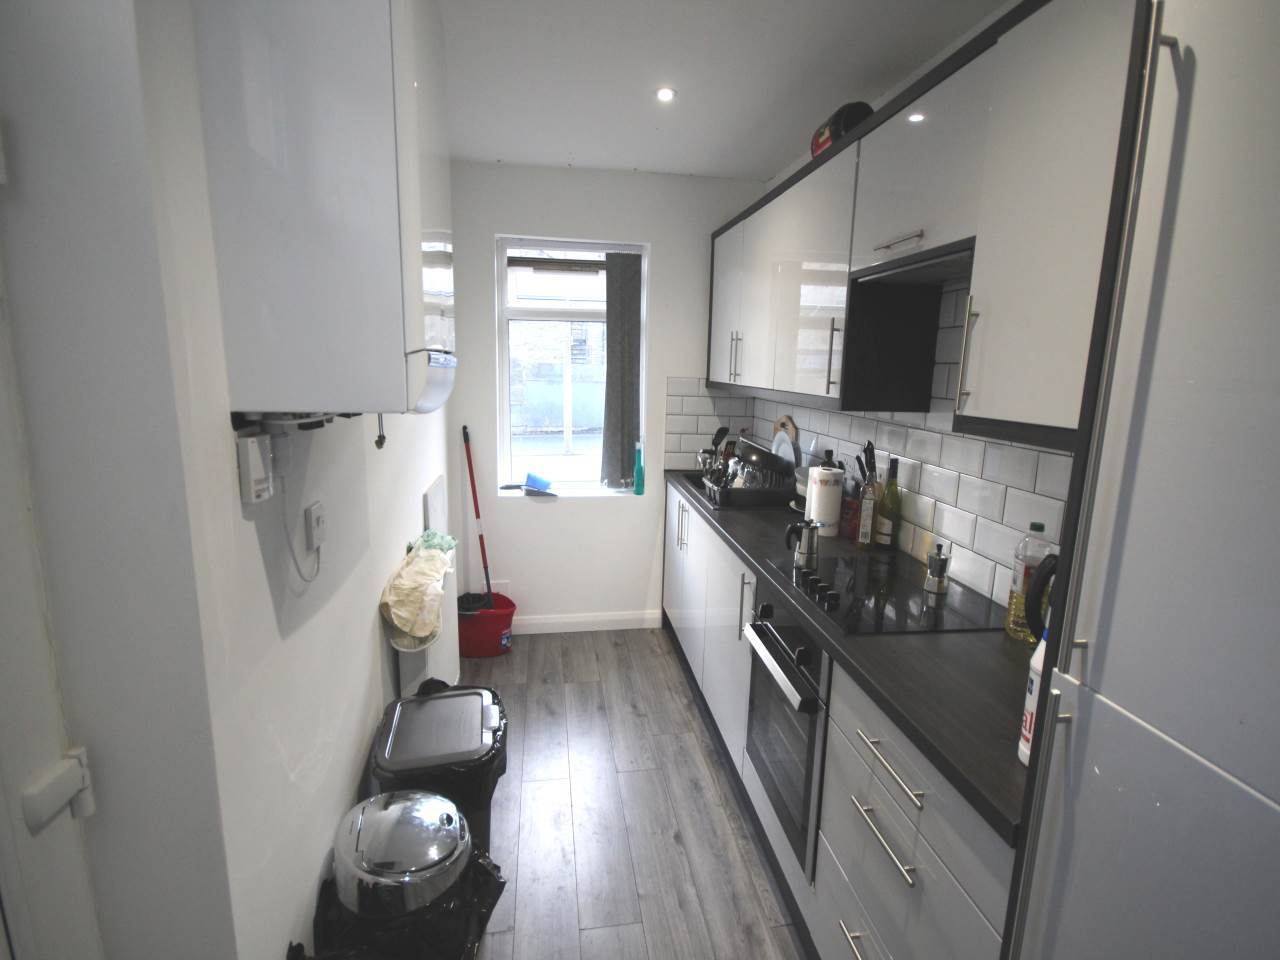 1 bed house / flat share to rent in Grove Terrace  - Property Image 4